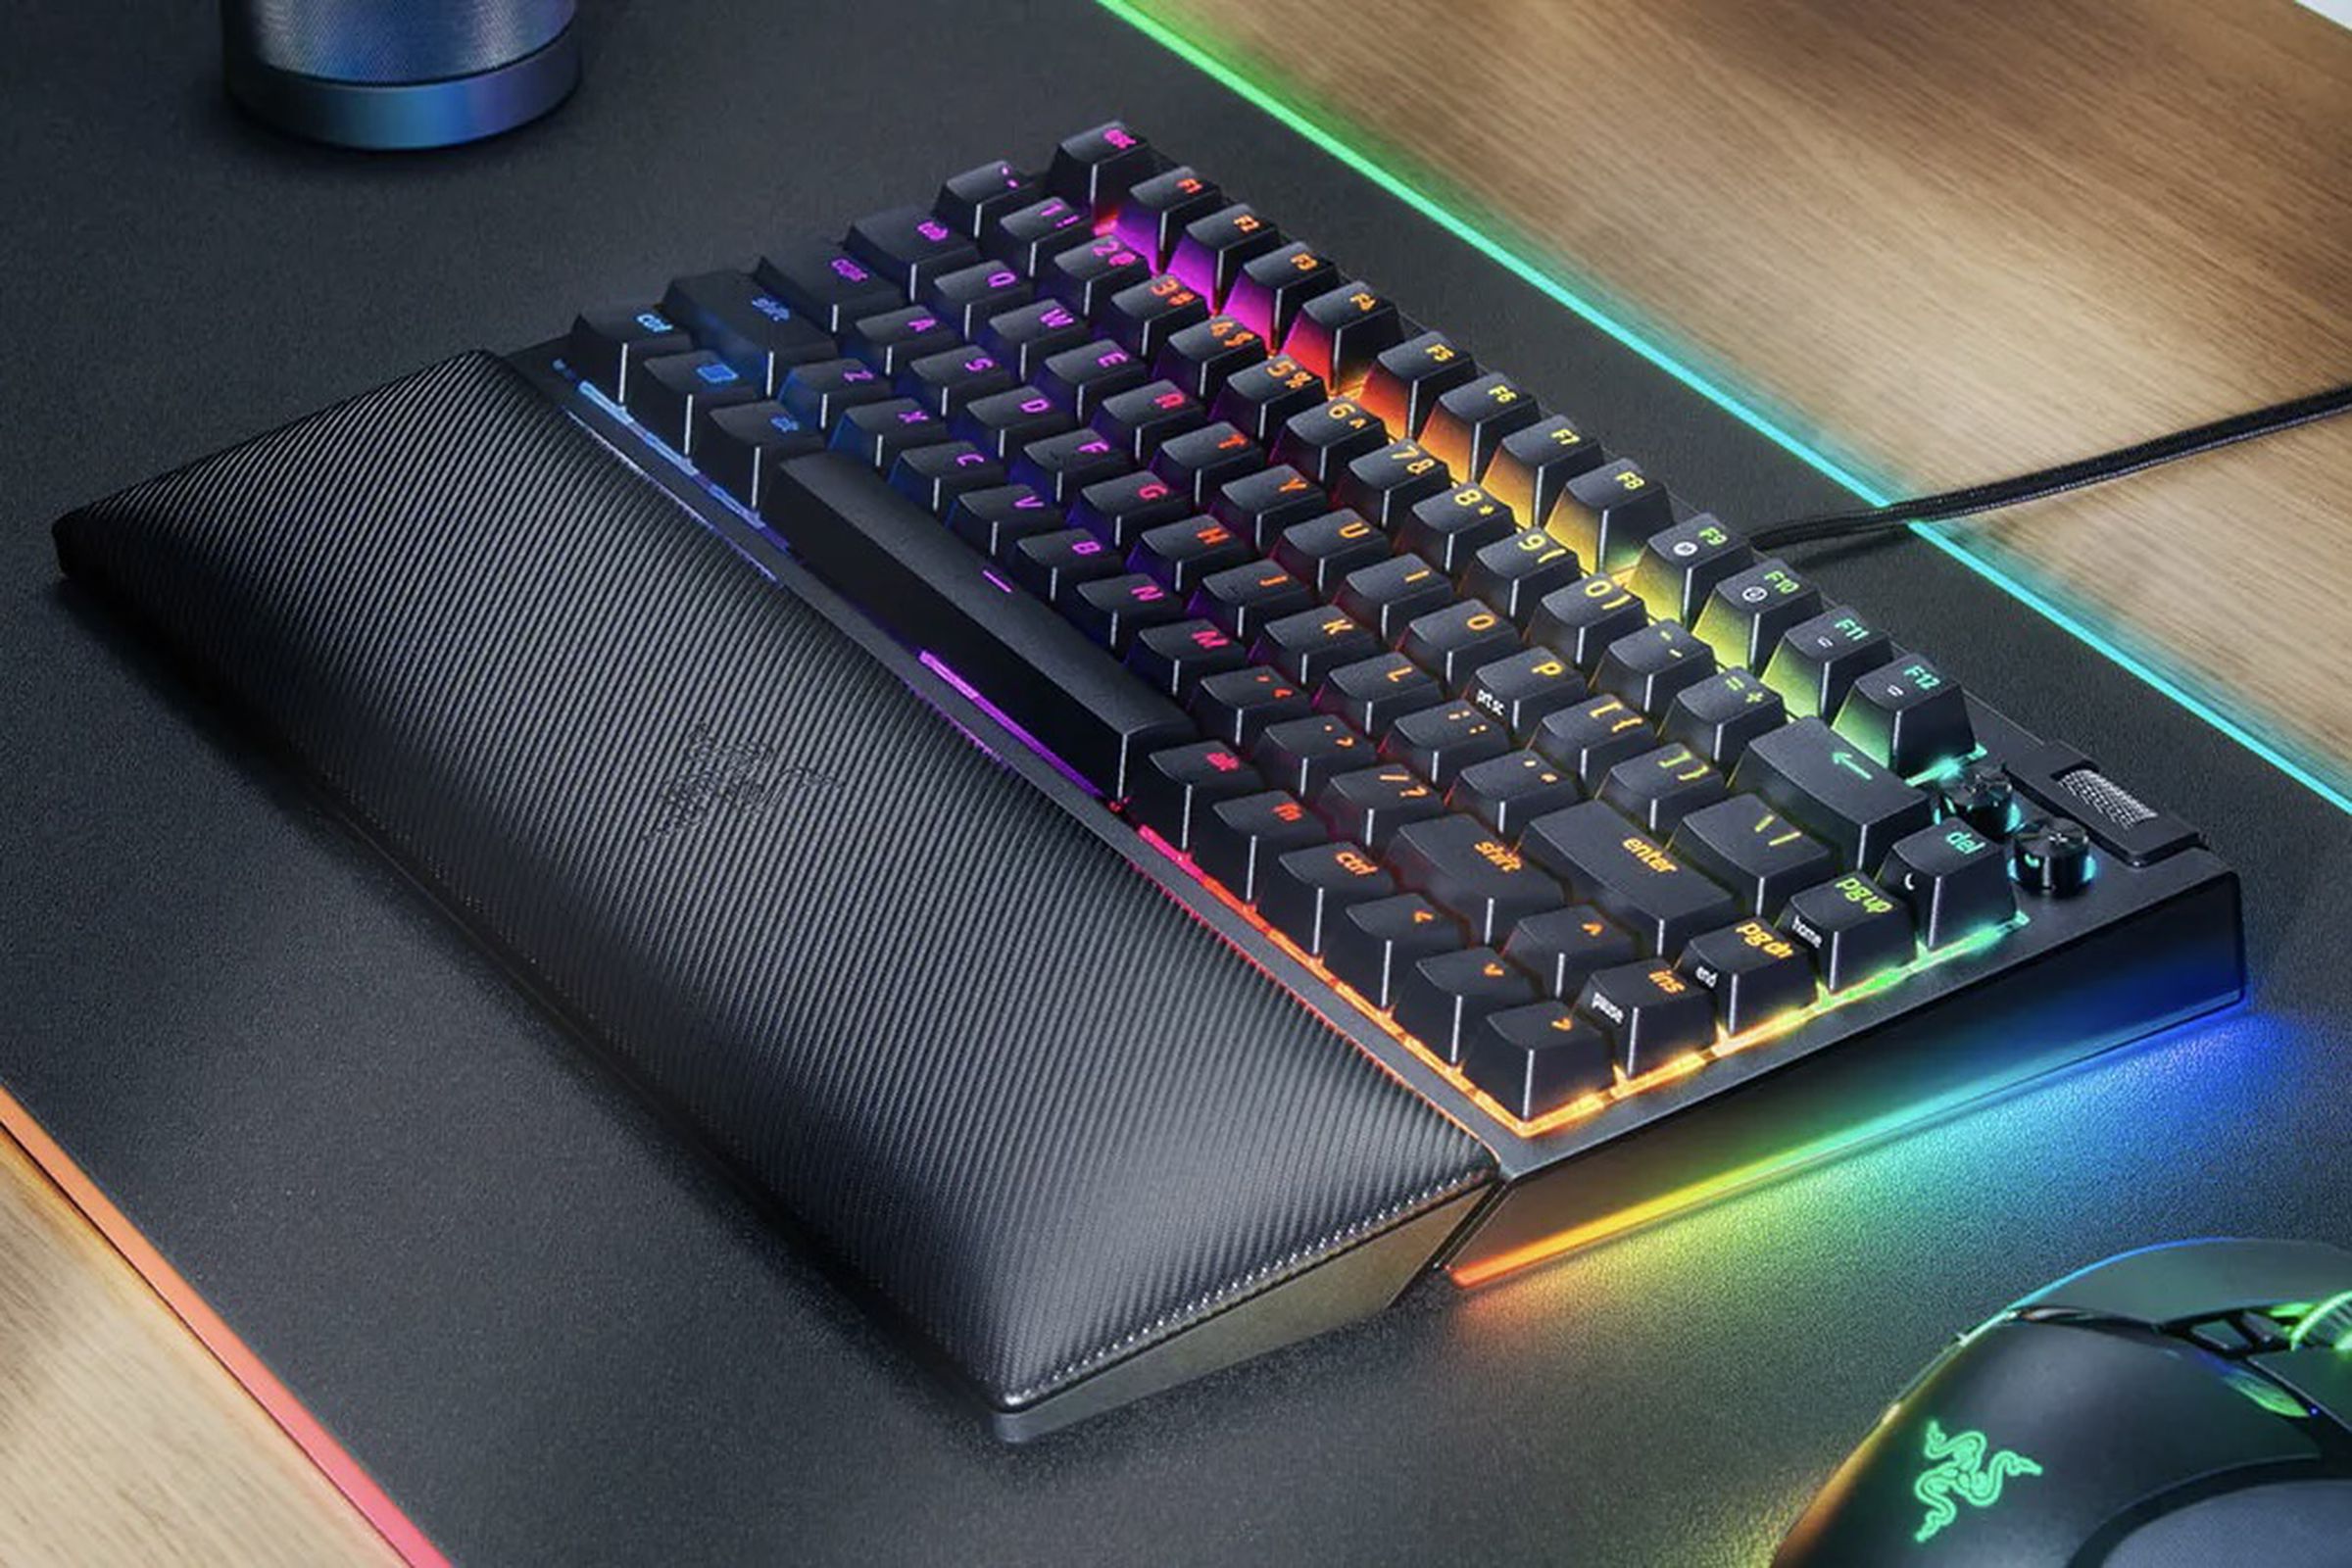 rgb-lit keyboard with mouse at side